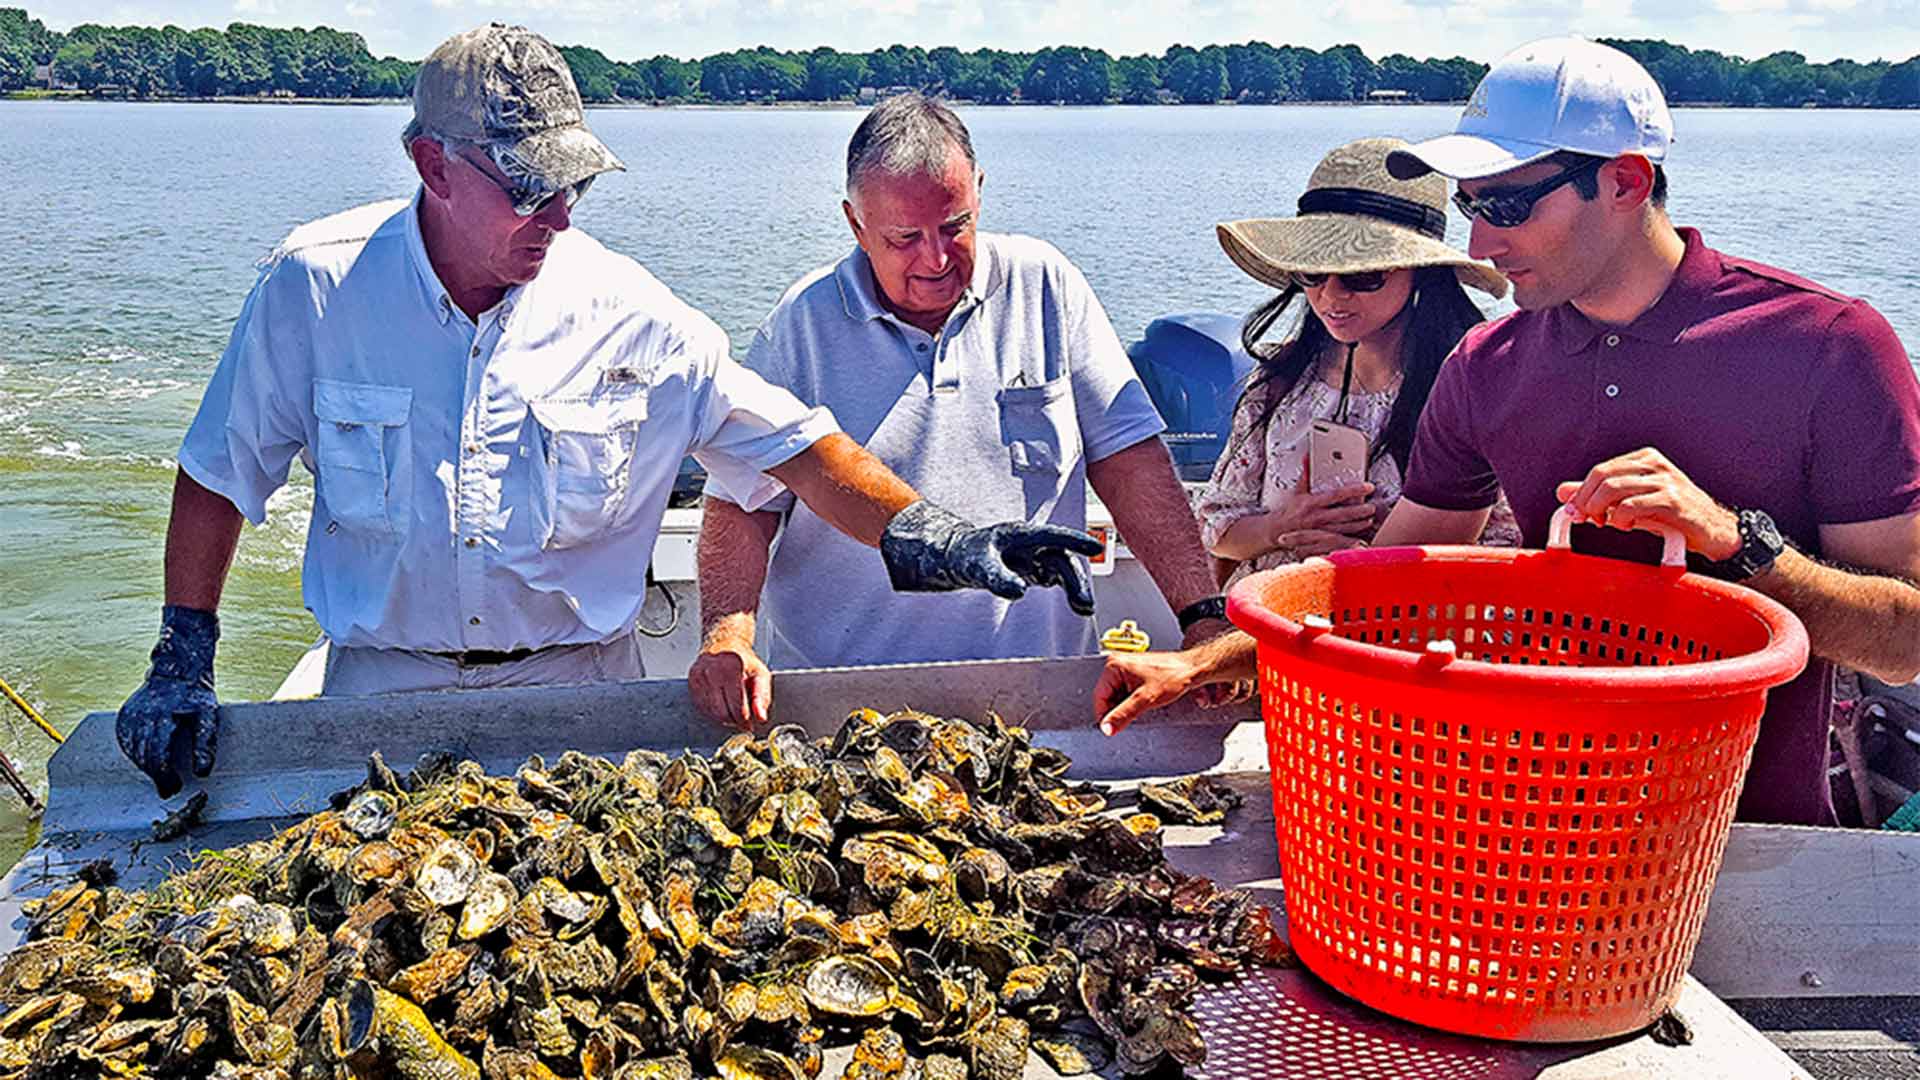 Members of the research team working together in the Chesapeake Bay for oyster imaging and dredging testing